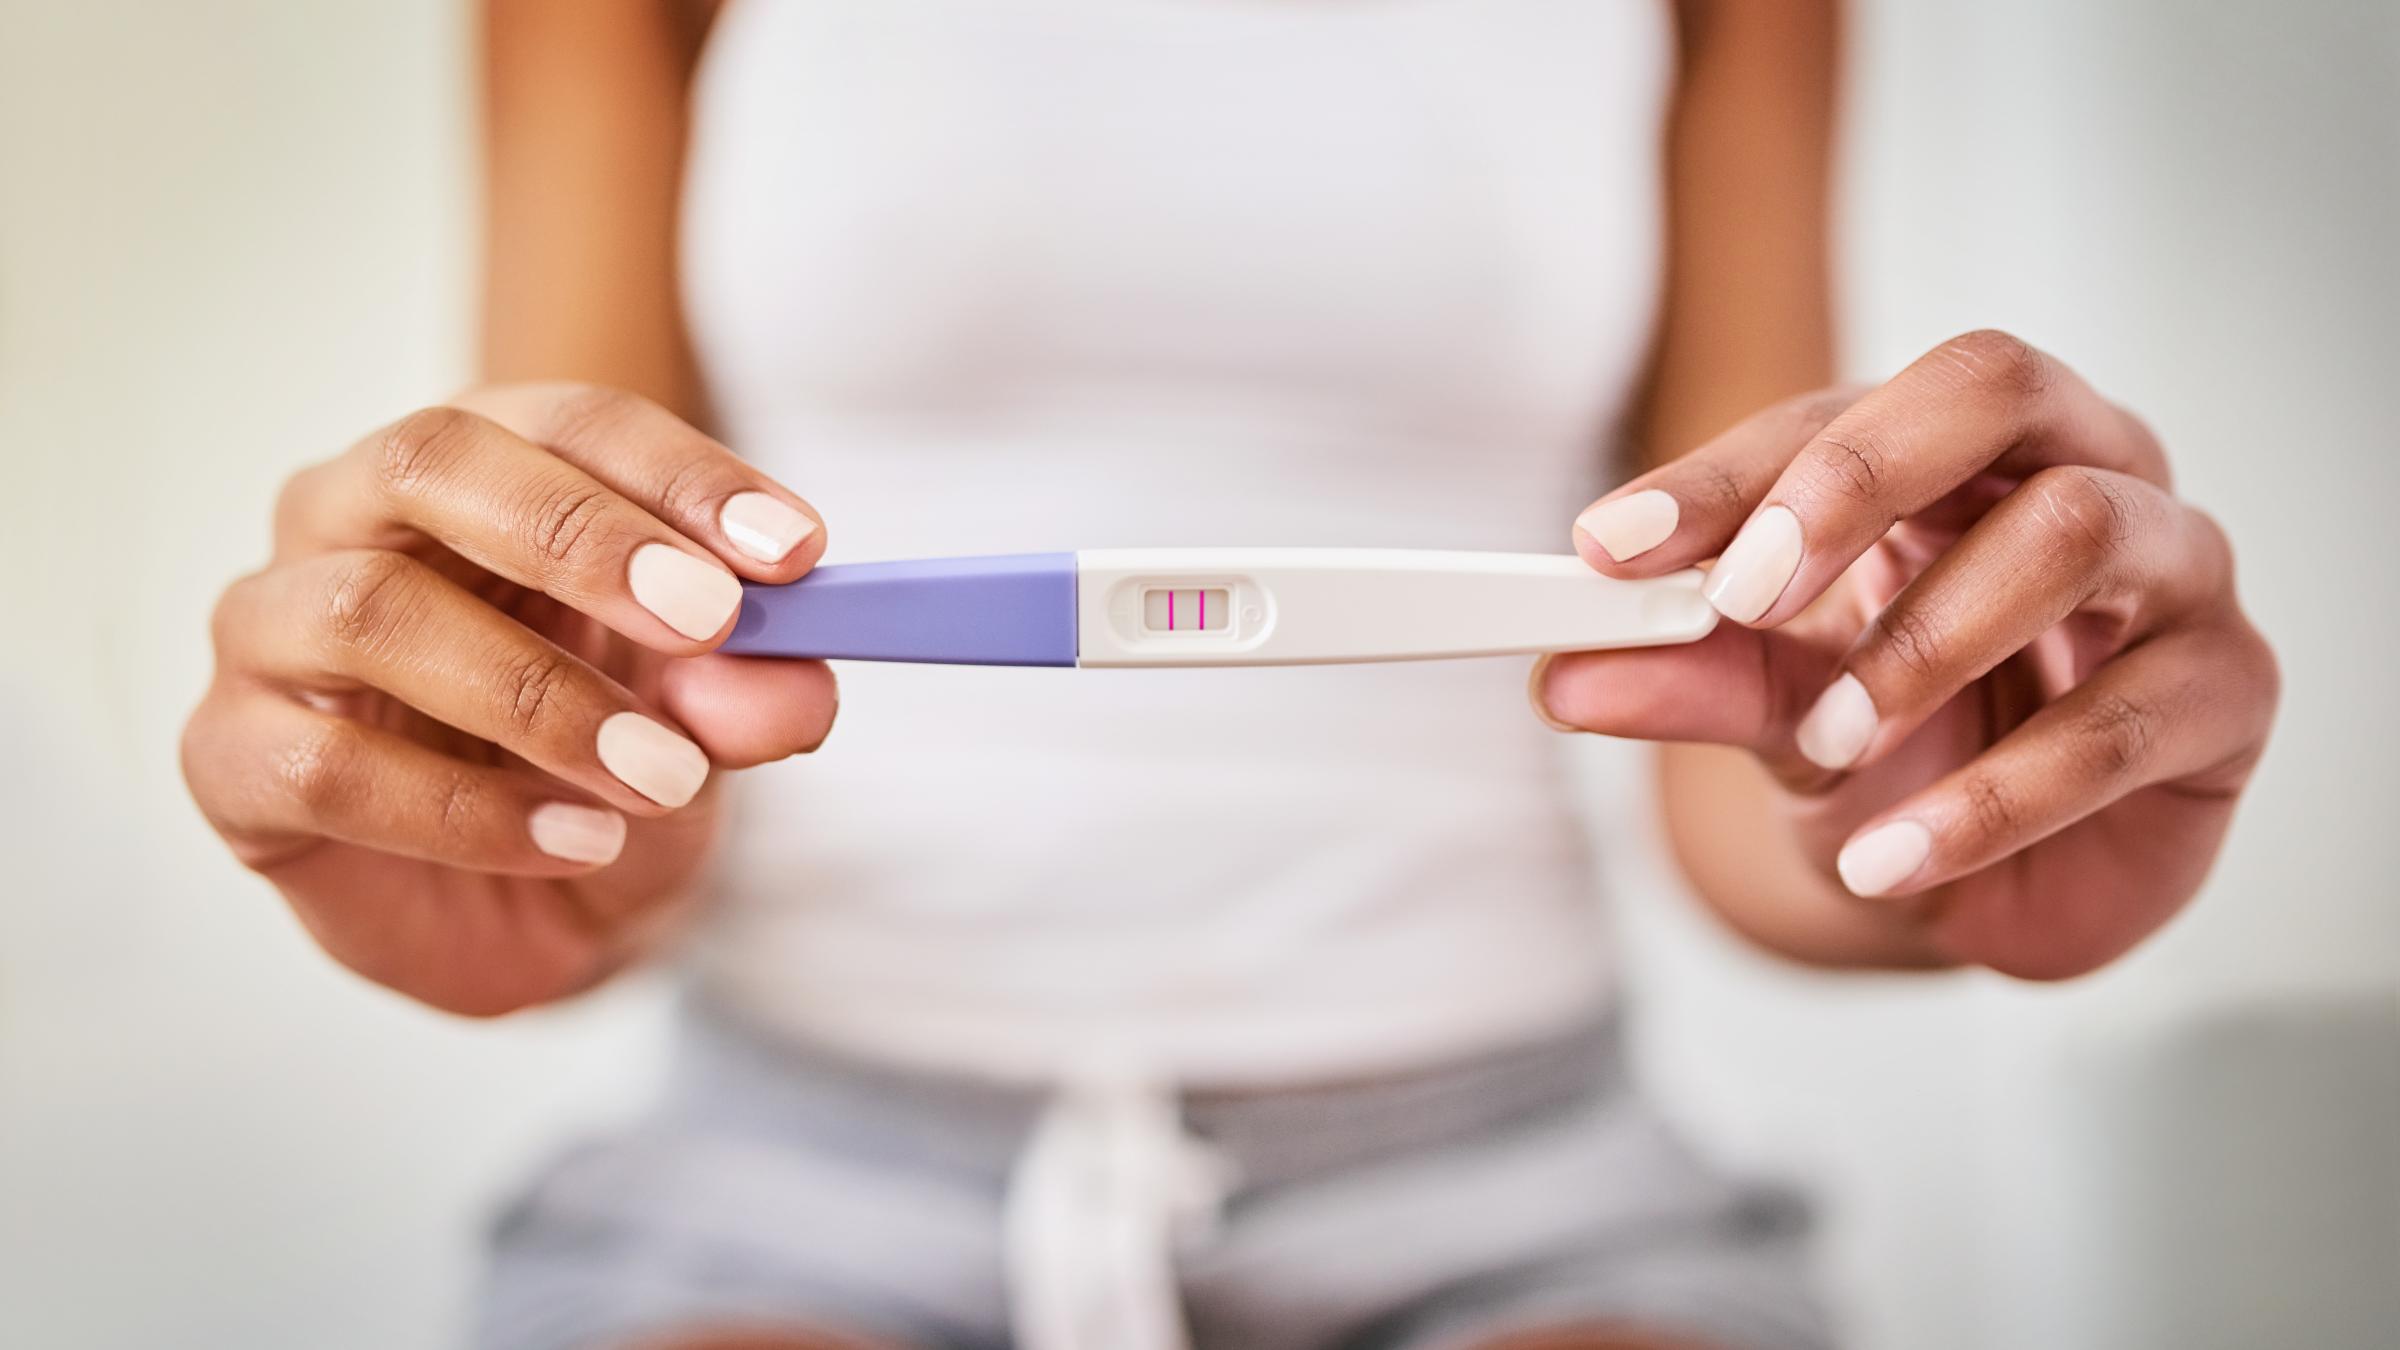 When is the best time to take a pregnancy test?